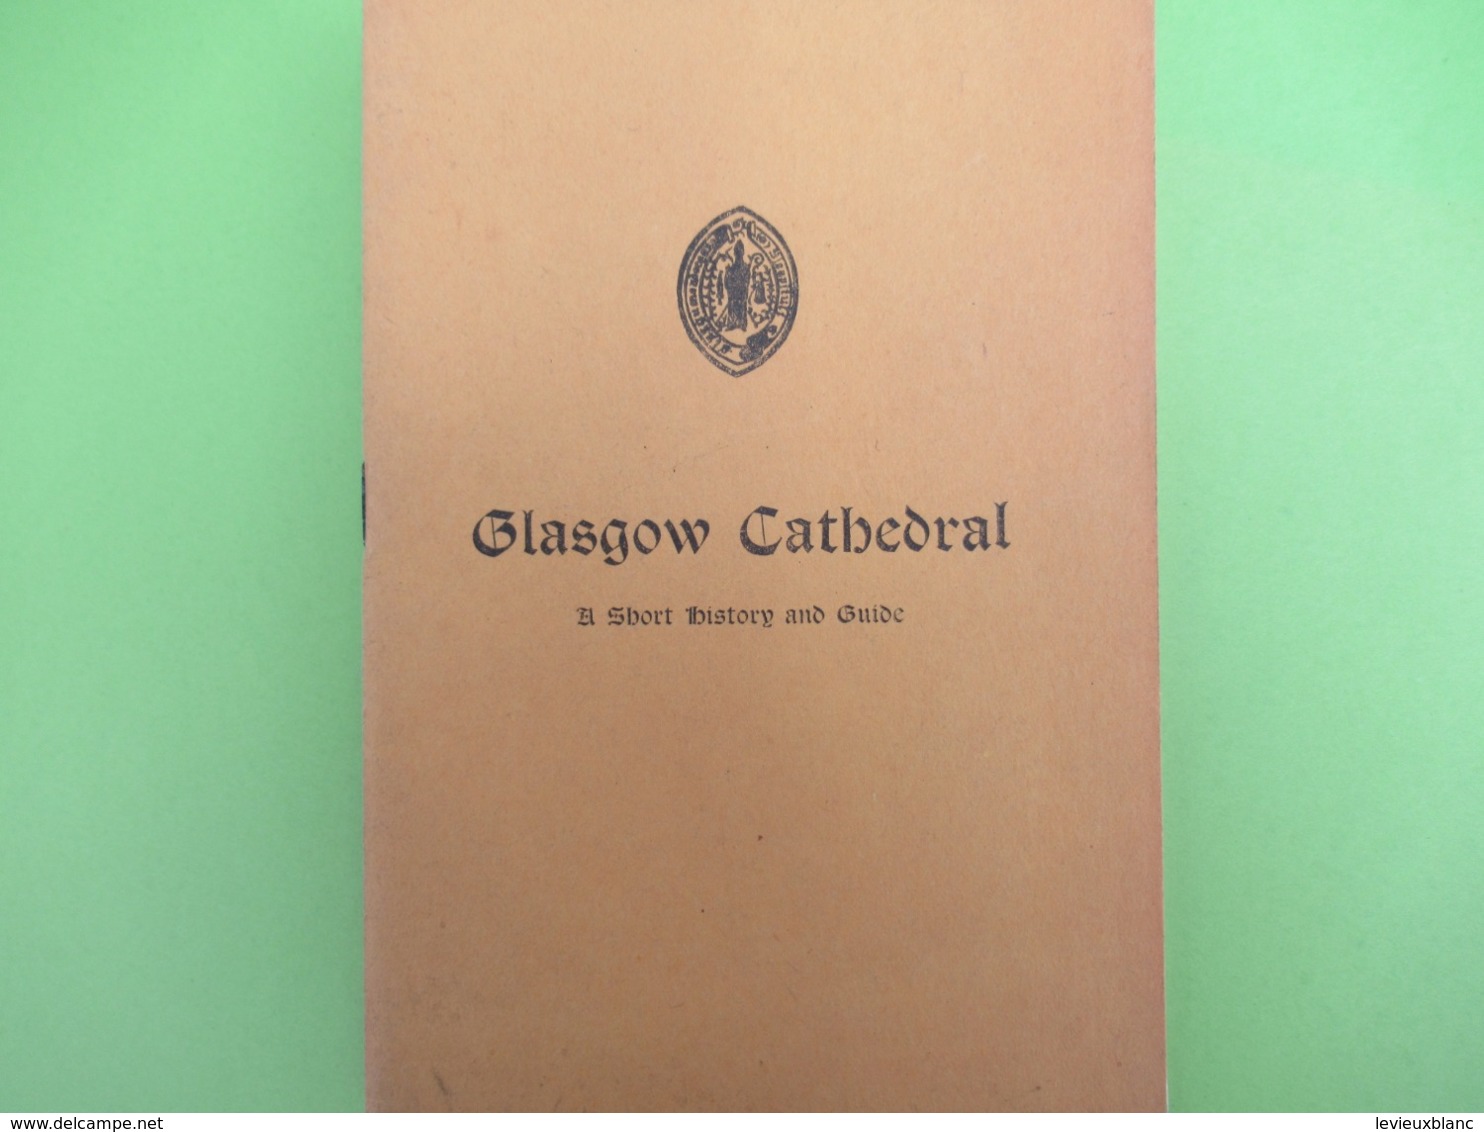 Guide Historique/A Short History And Guide/GLASGOW CATHEDRAL/A Nevile Davidson/Minister Of Glasgow/1938          PGC383 - Architettura